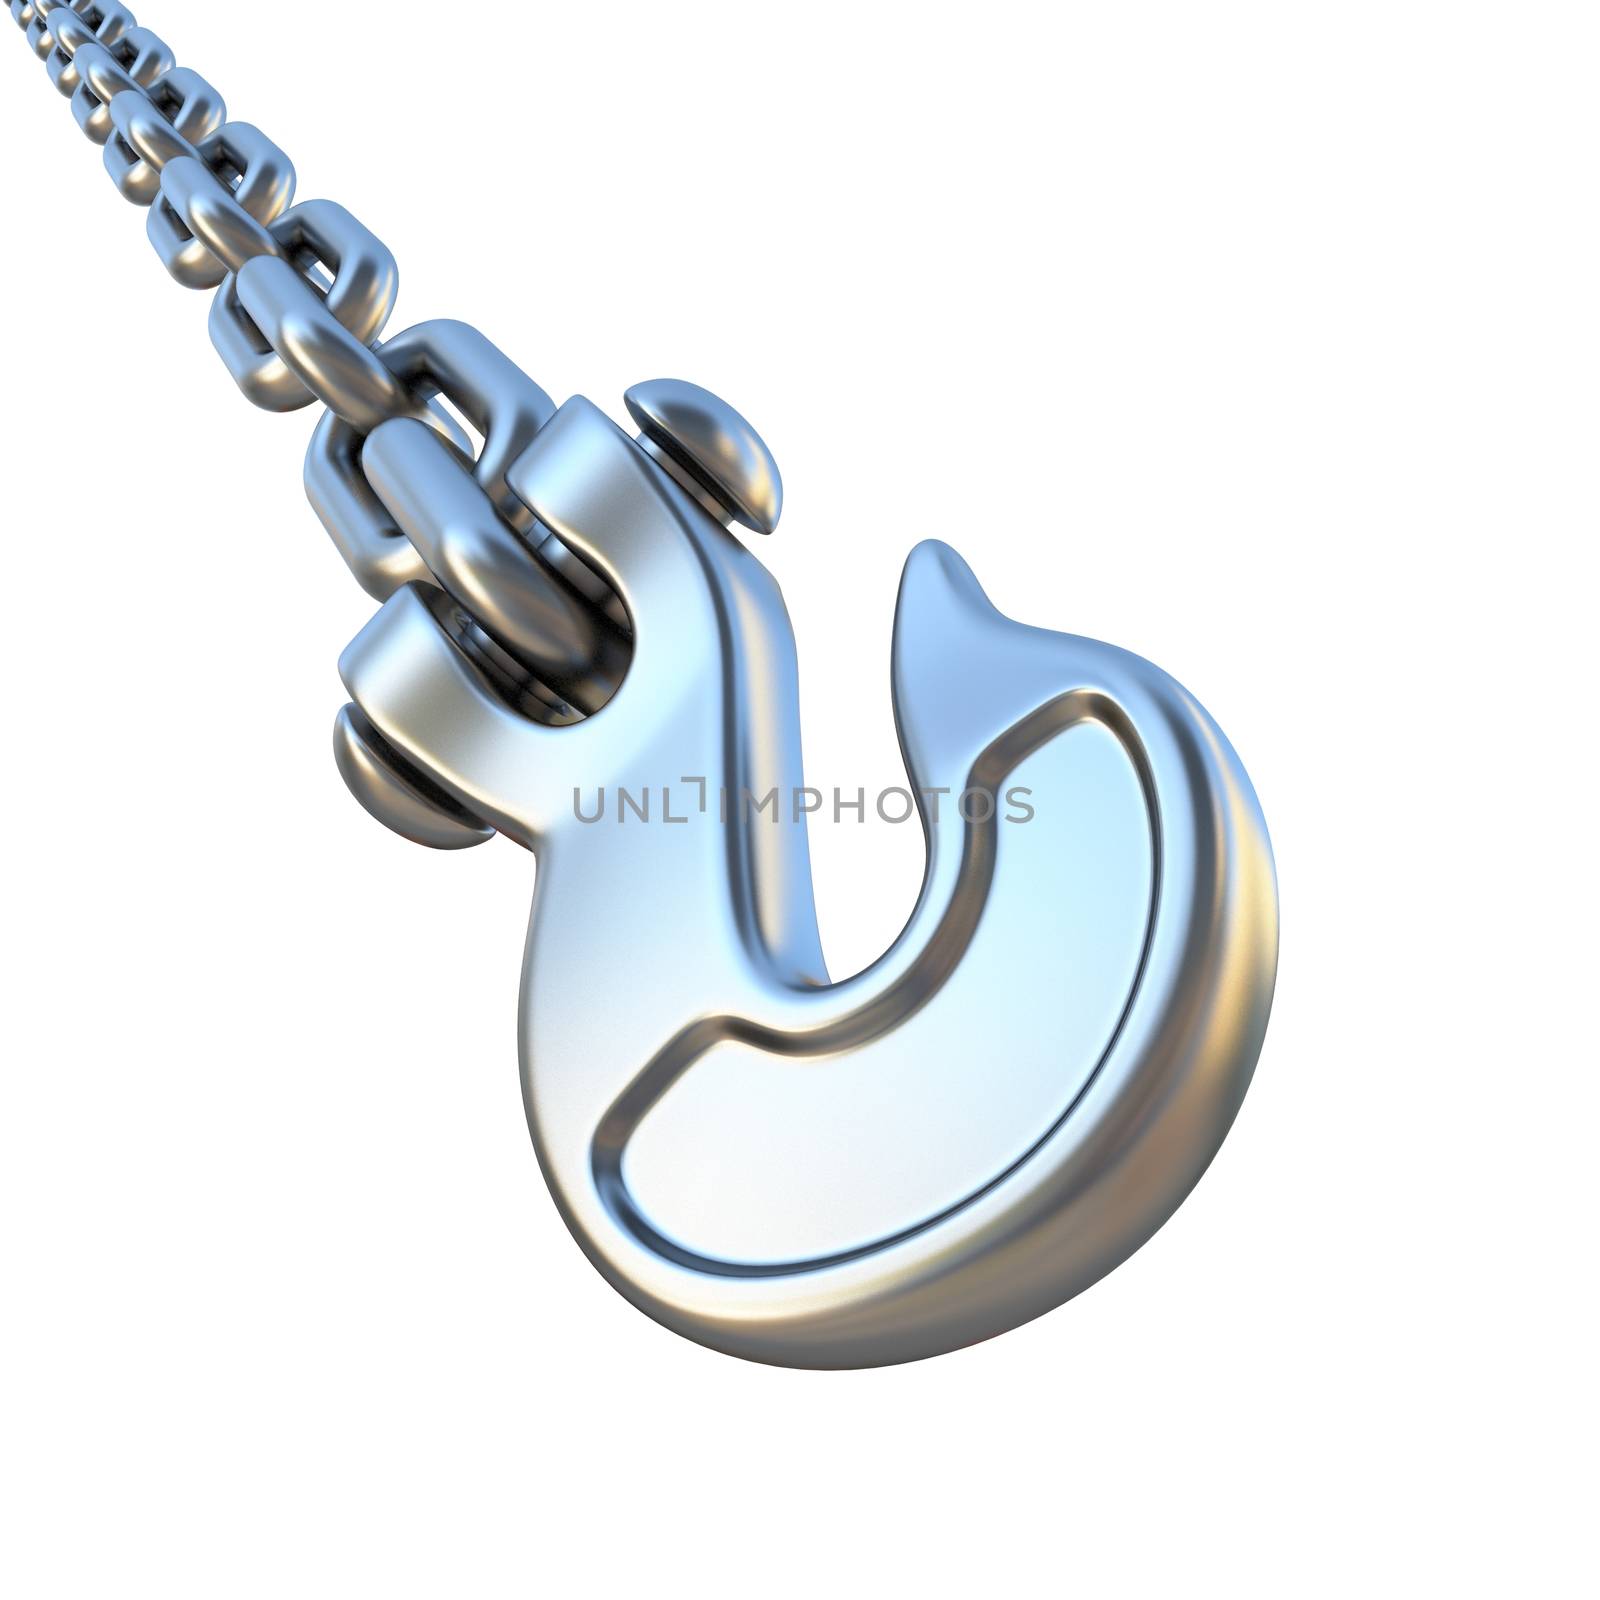 Silver hook and chain diagonal 3D render illustration isolated on white background